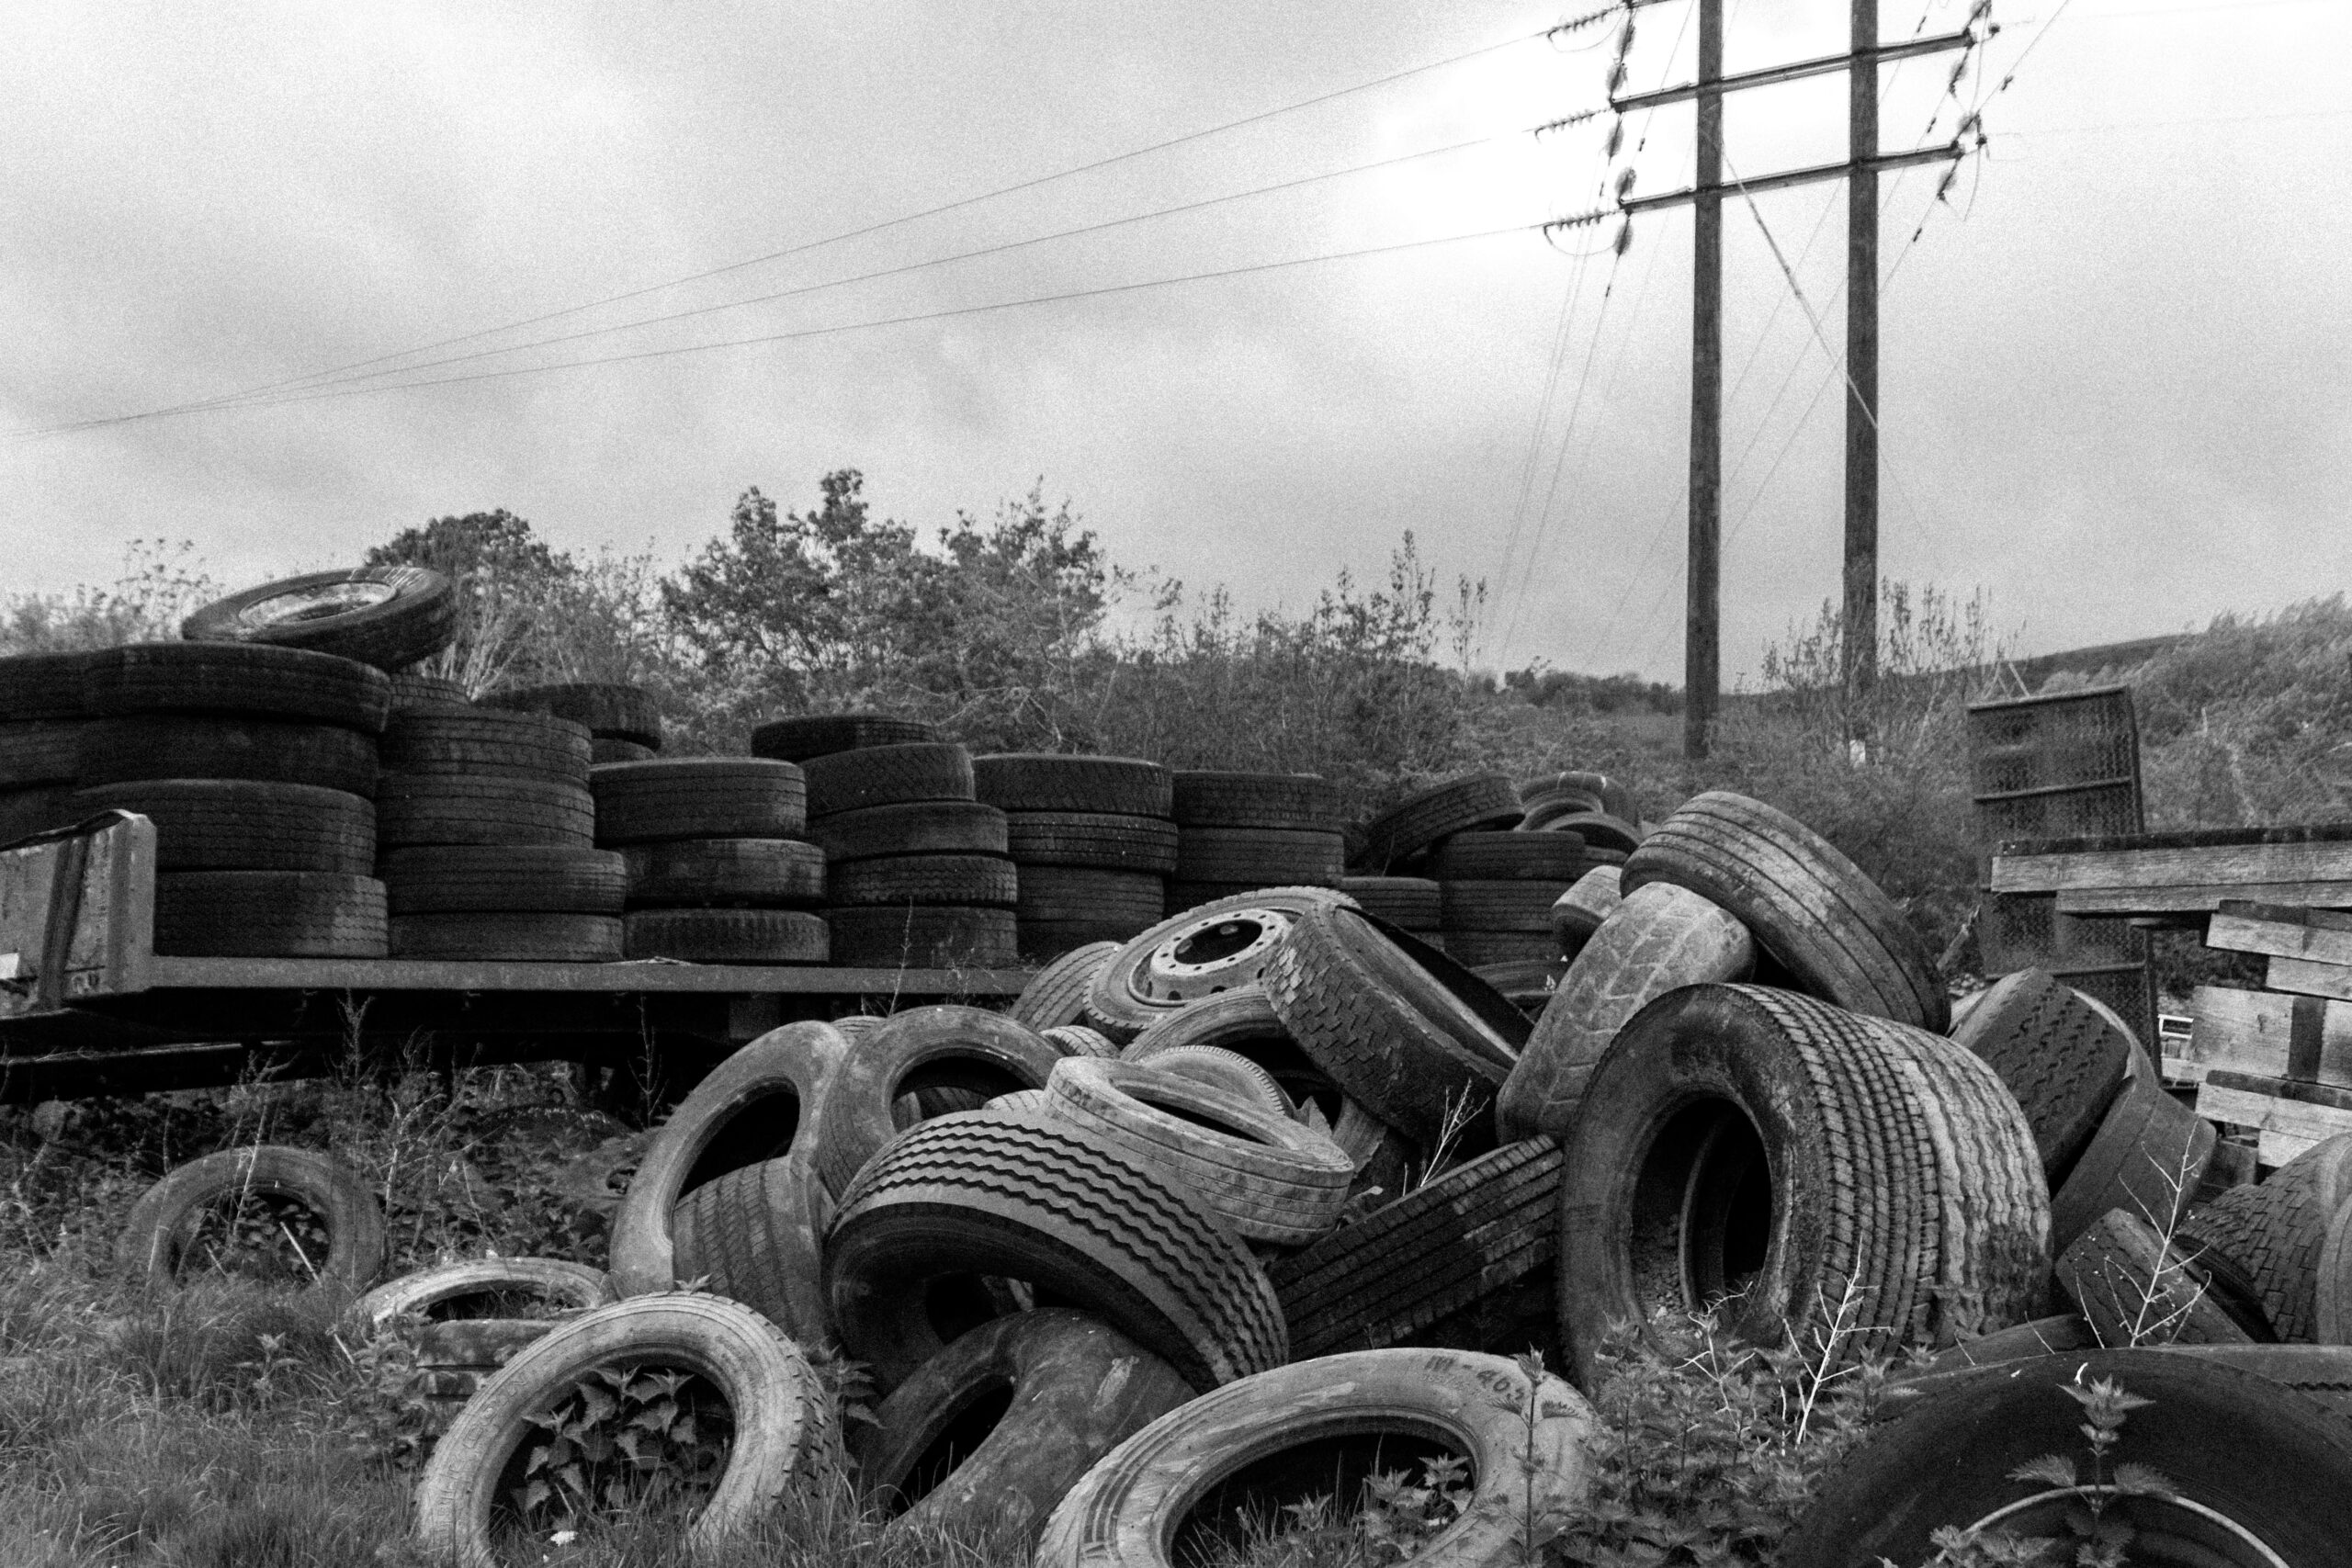 tyres piled up in a yard for disposal.